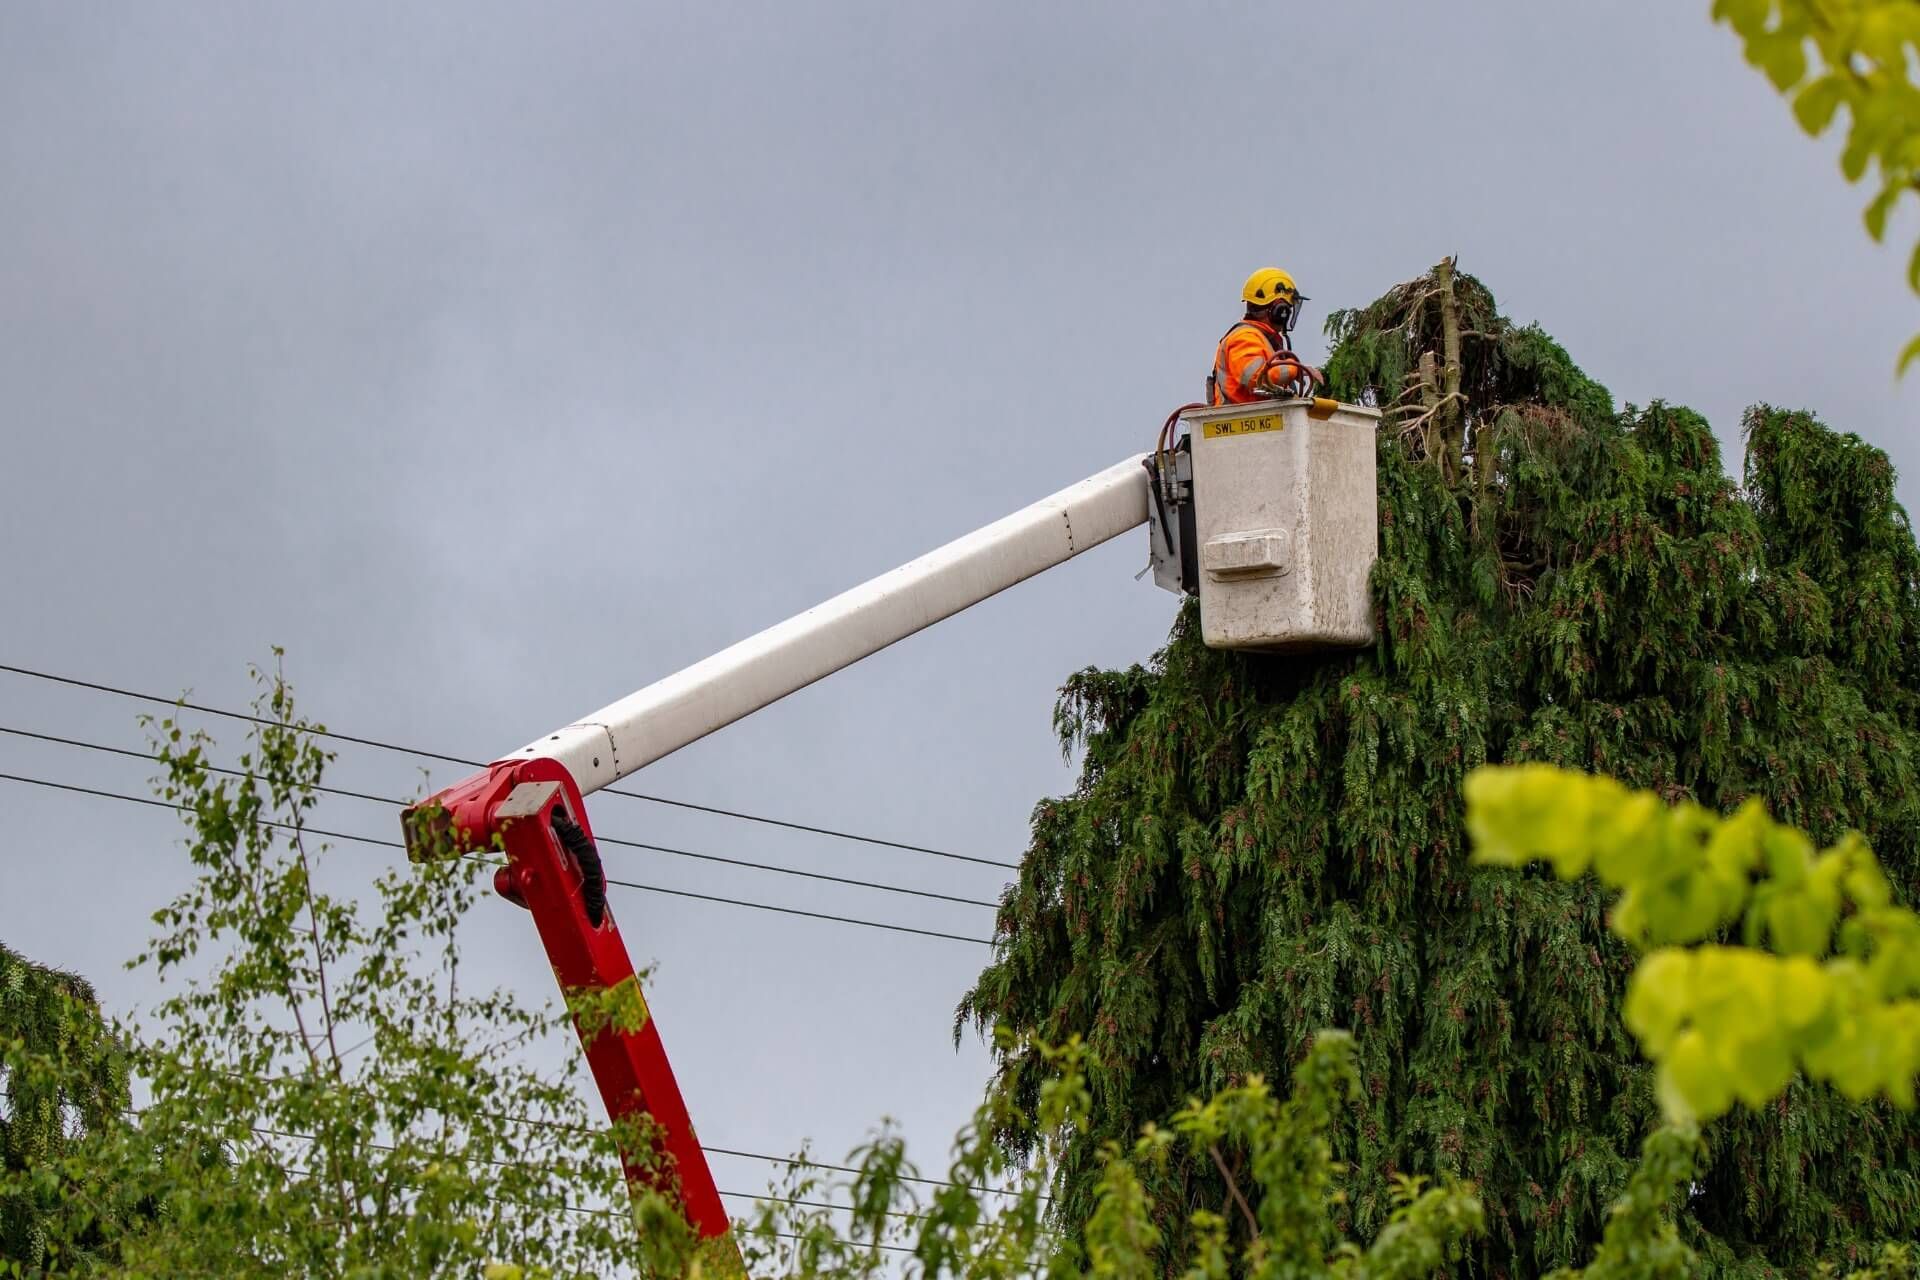 A man is cutting a tree with a crane